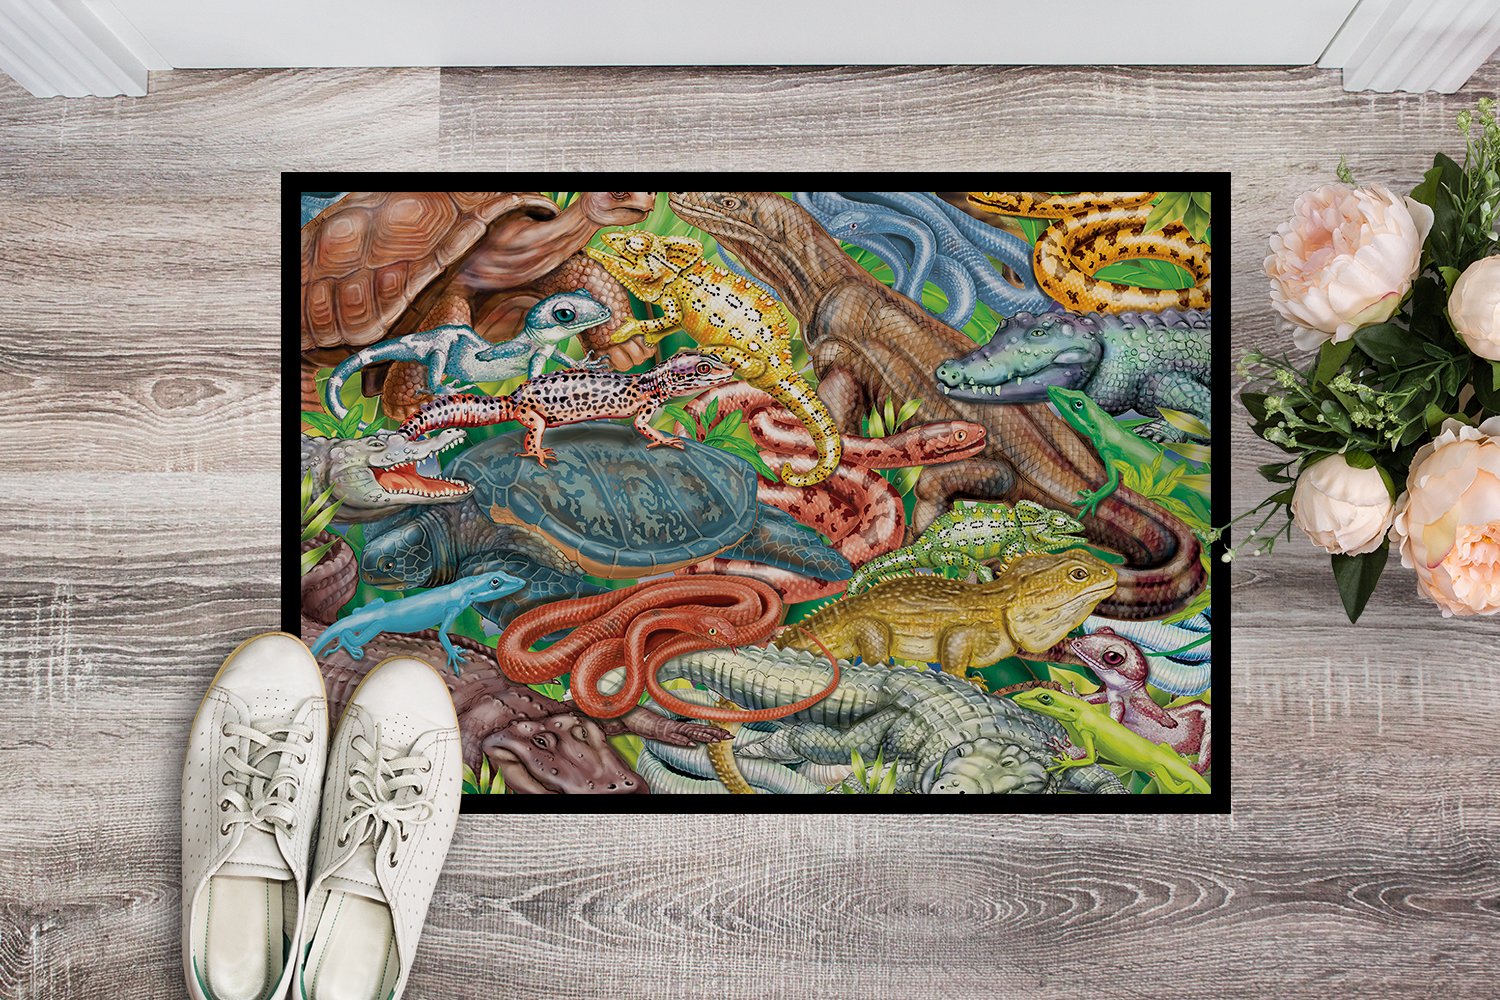 Scales and Tails, Snakes, Turtle, Reptiles Indoor or Outdoor Mat 24x36 PRS4034JMAT by Caroline's Treasures